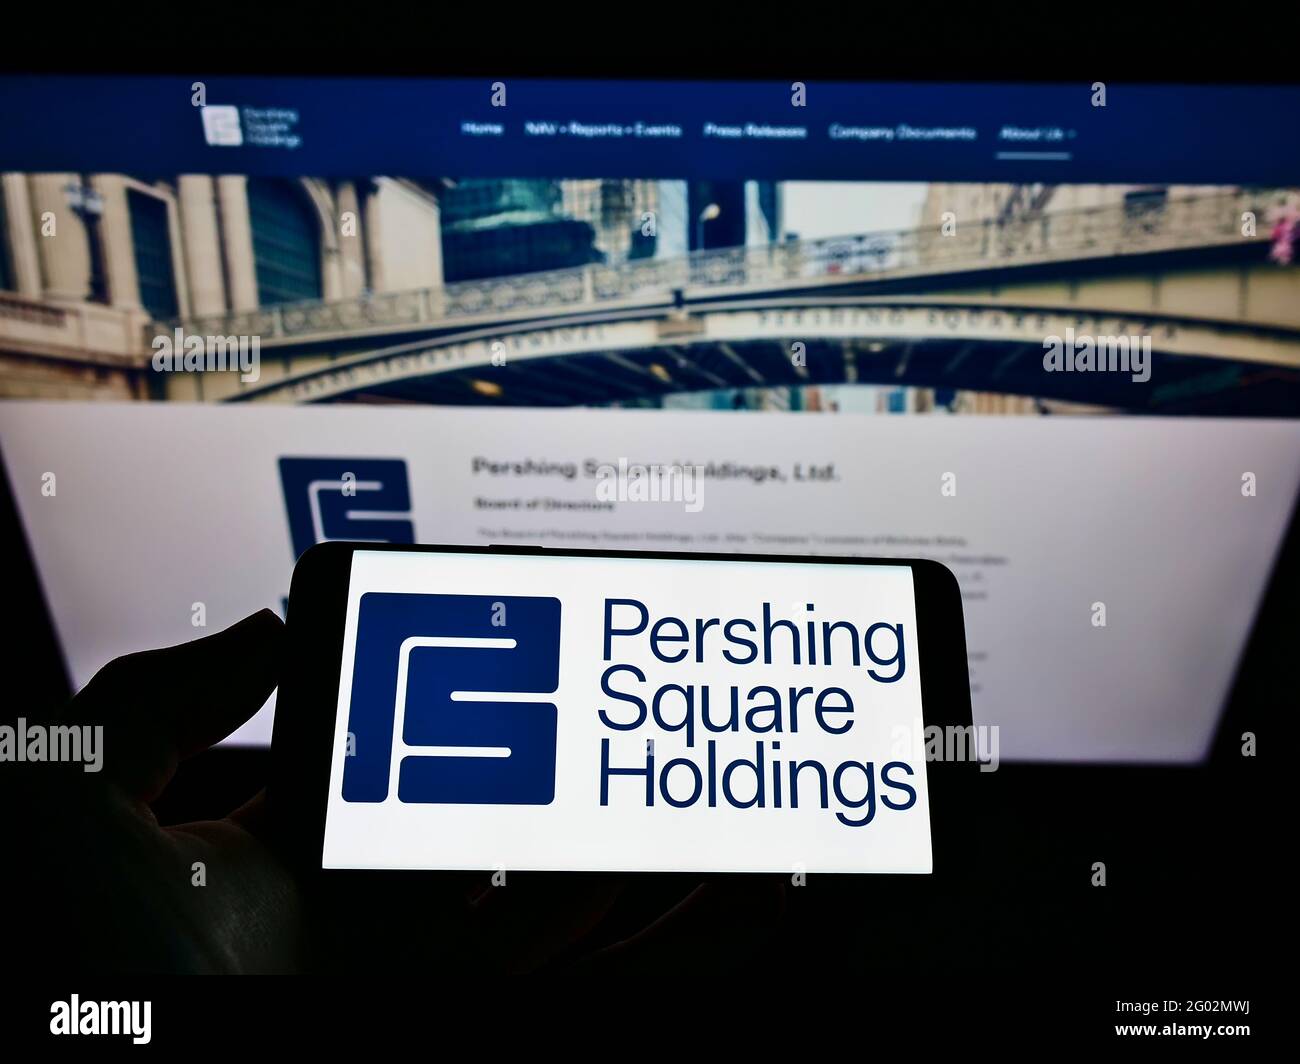 Person holding smartphone with logo of company Pershing Square Capital Management L.P. on screen in front of website. Focus on phone display. Stock Photo